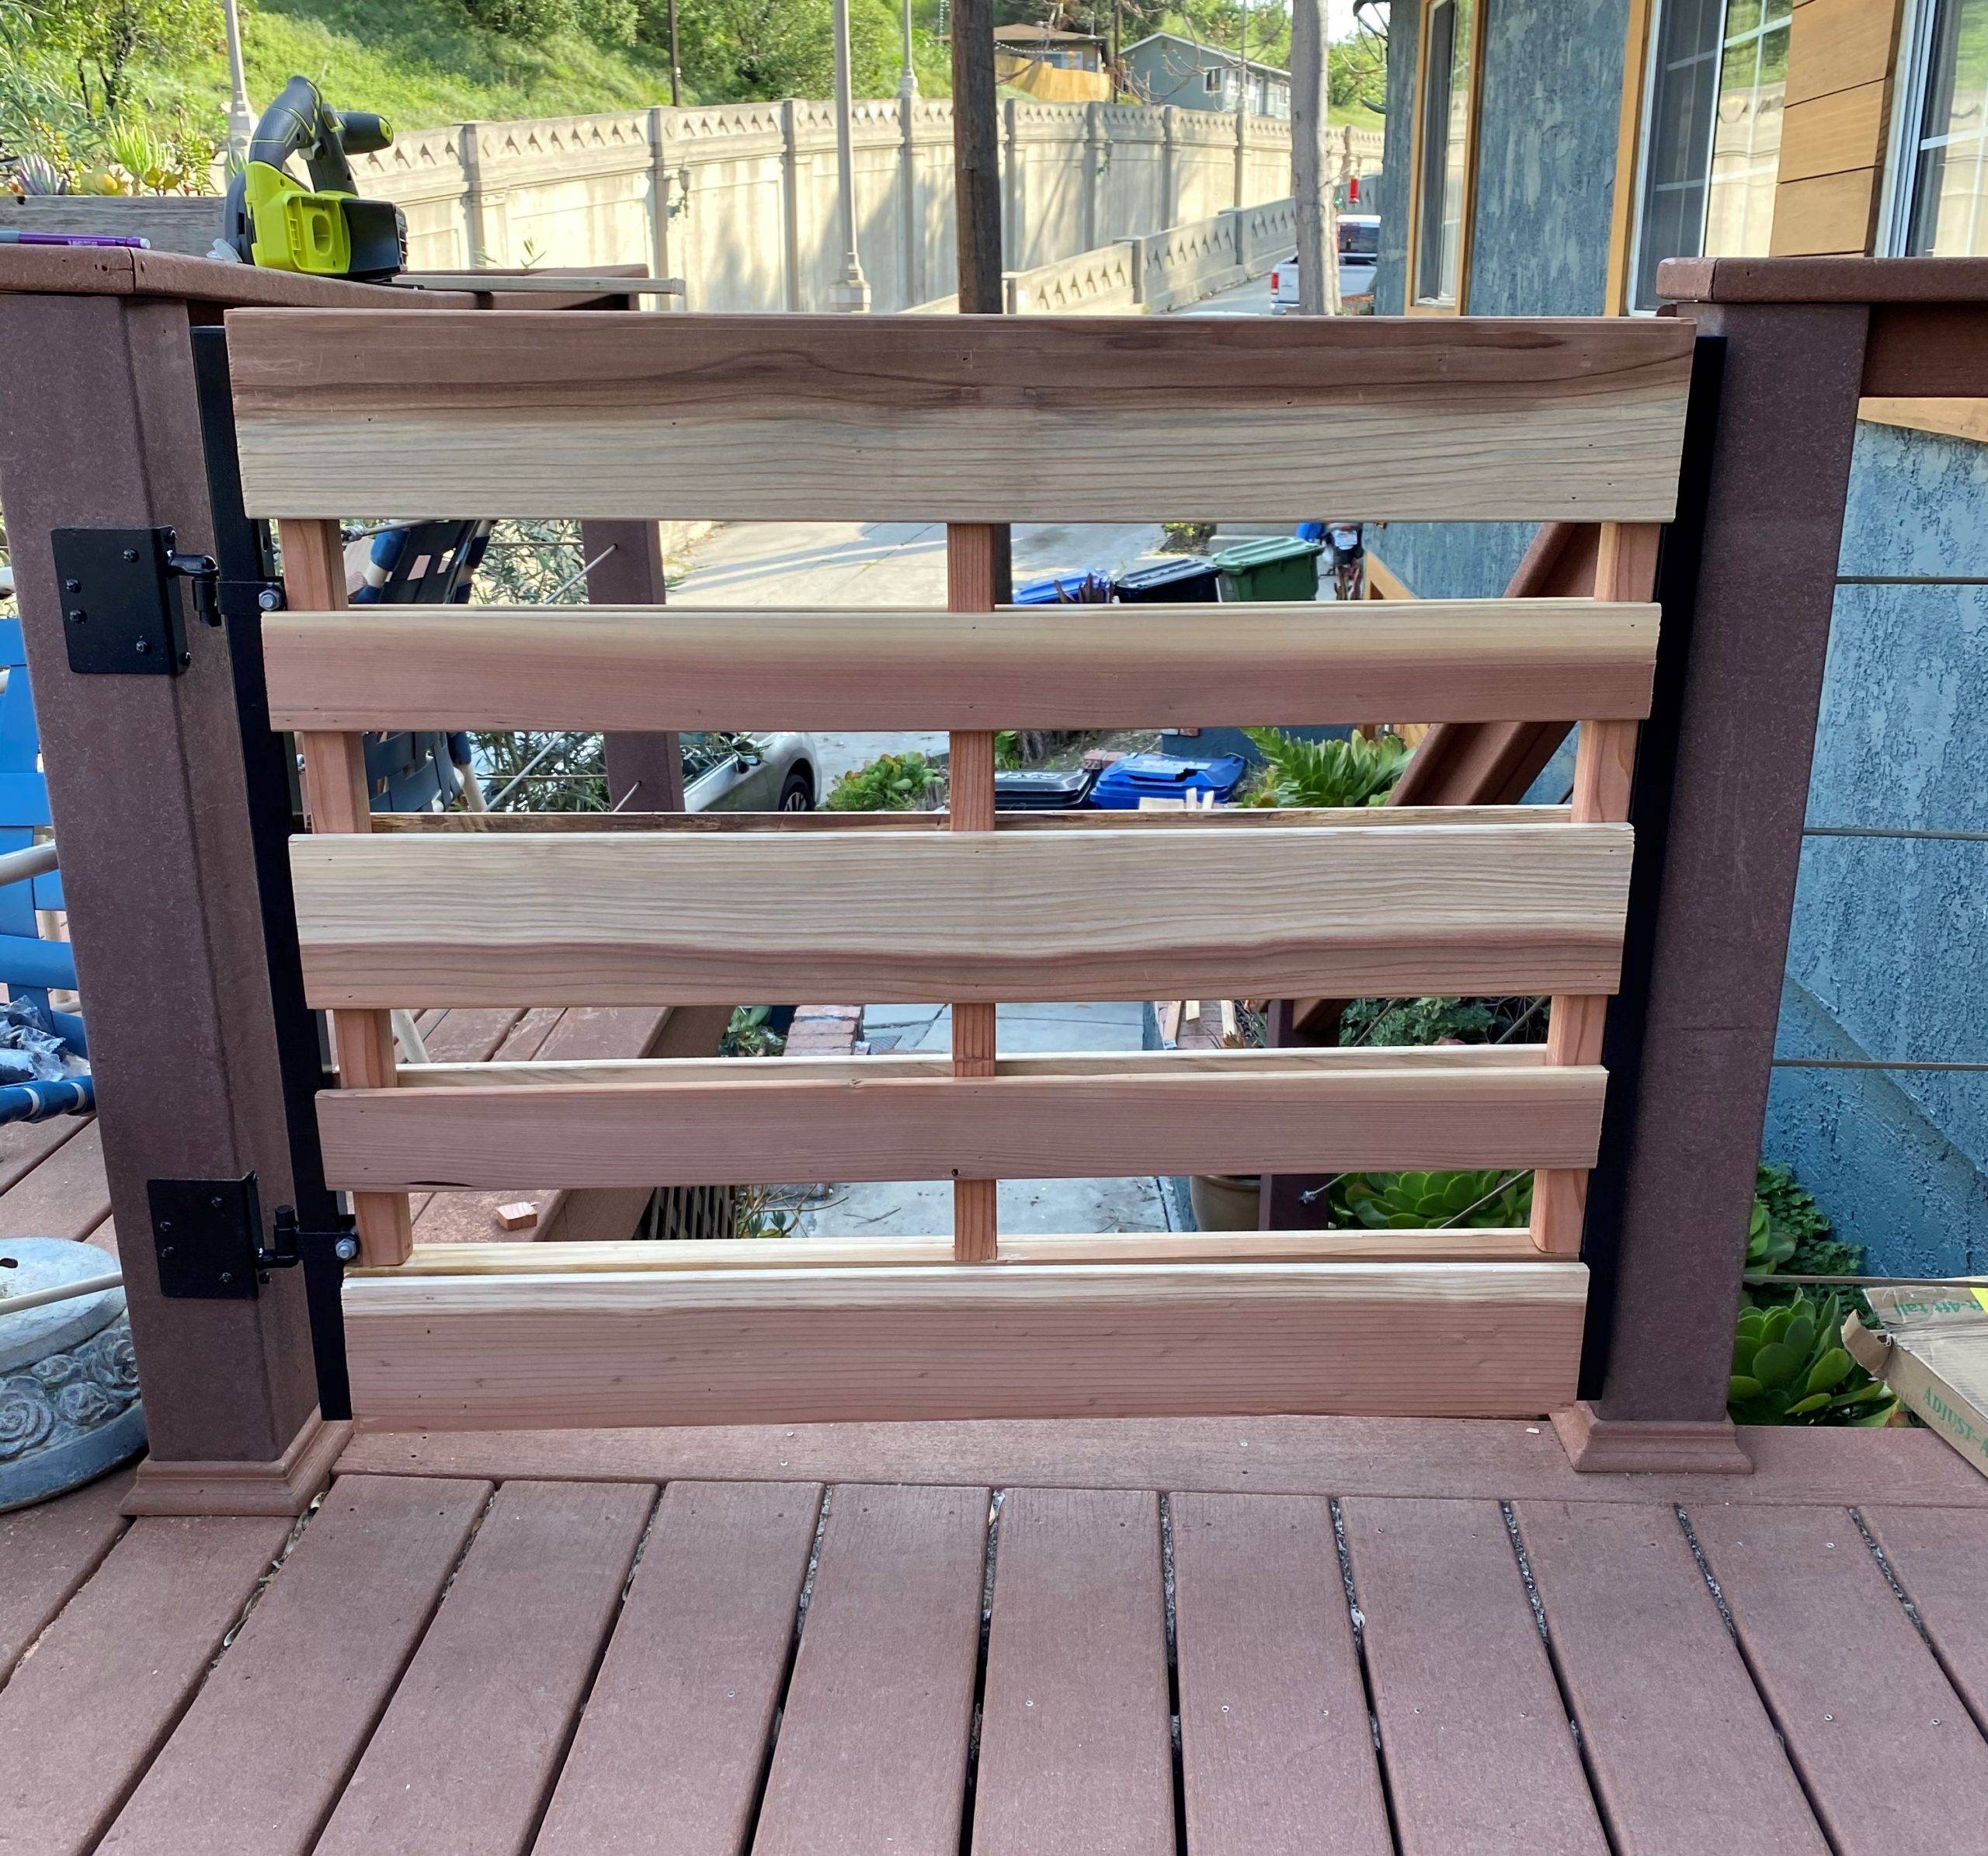 How To Build A Deck Gate With Easy To Source Materials - ManMadeDIY